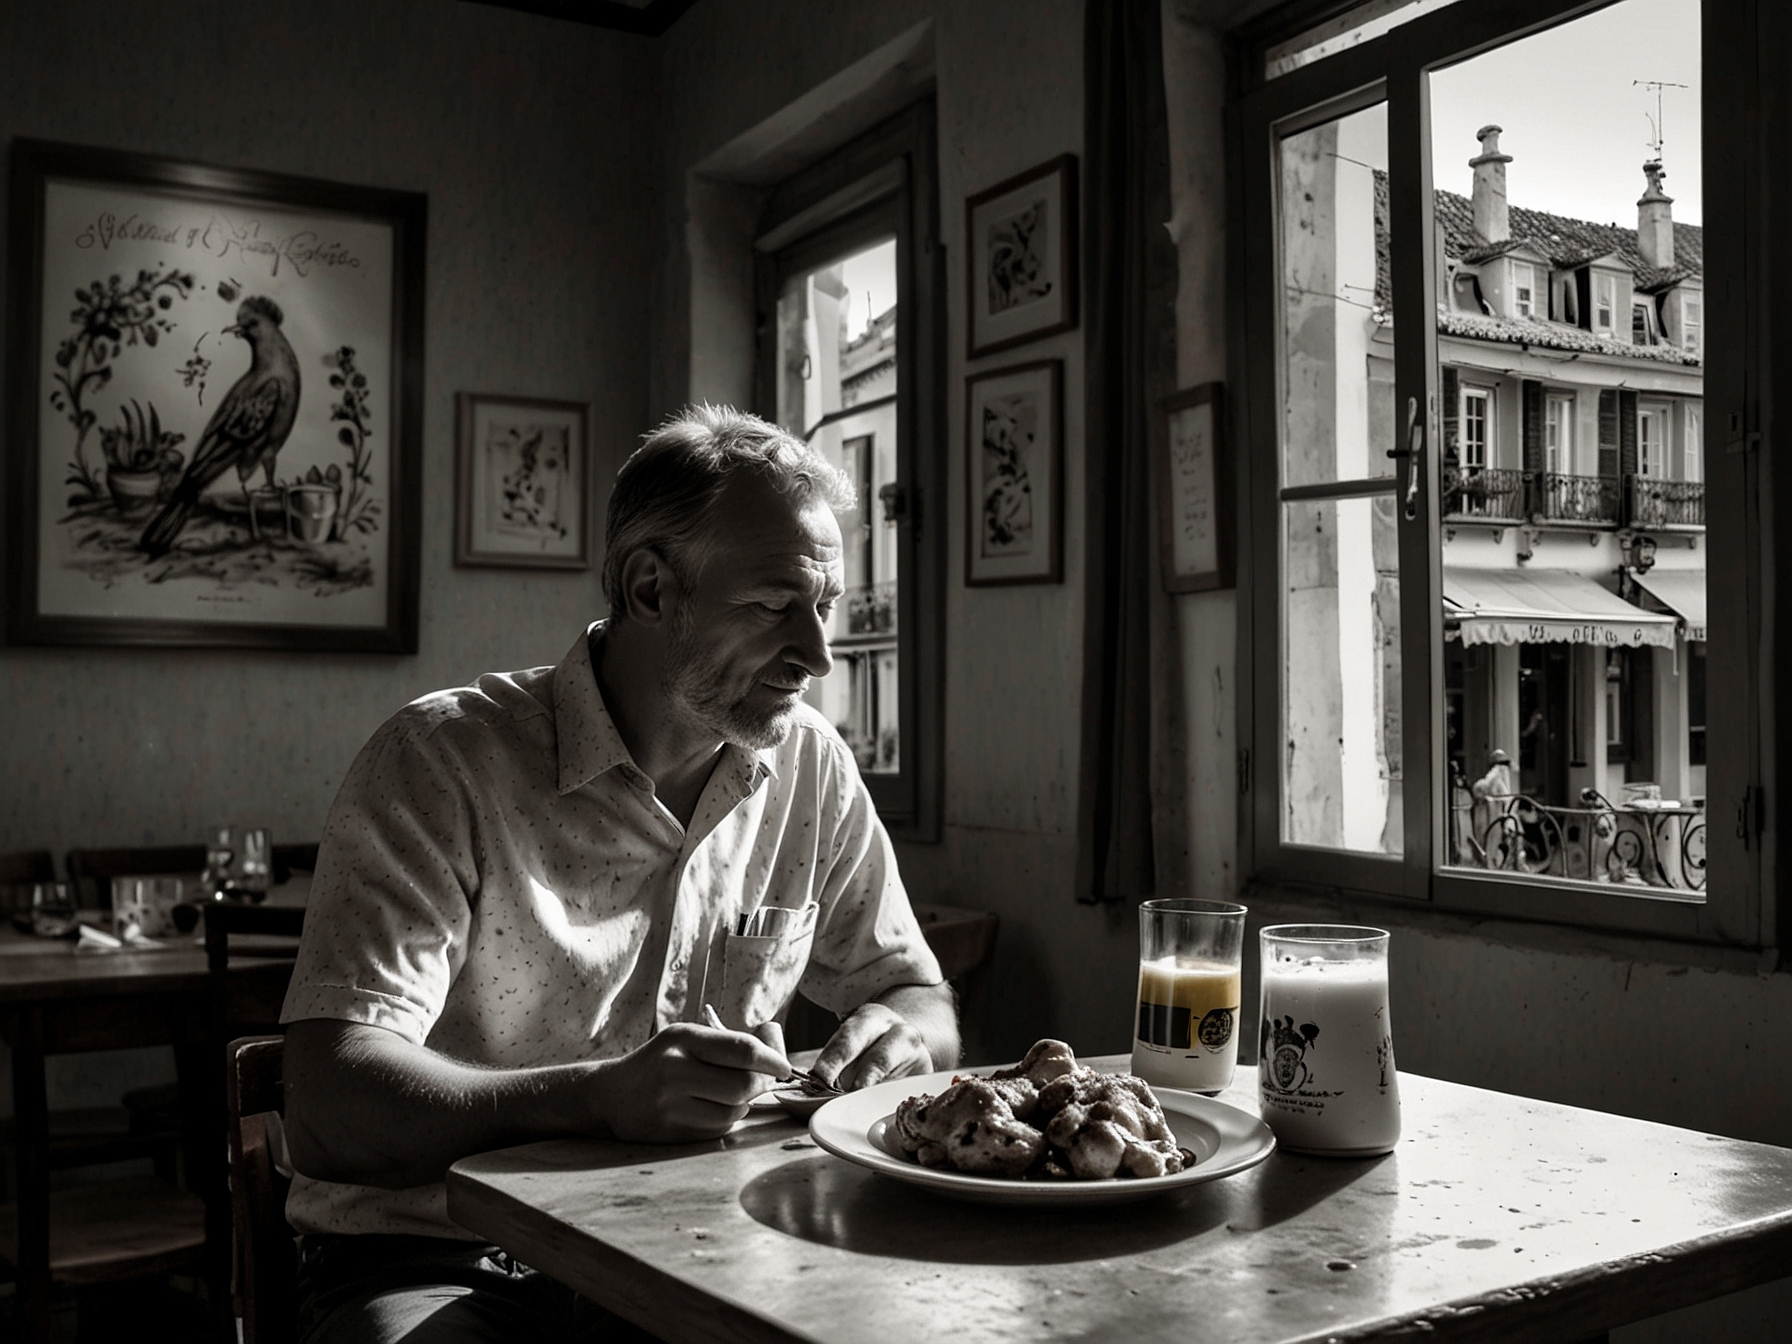 A traveler savoring a plate of authentic peri peri chicken at a quaint Portuguese restaurant in Lisbon, capturing the vibrant, rustic atmosphere of the local eatery.